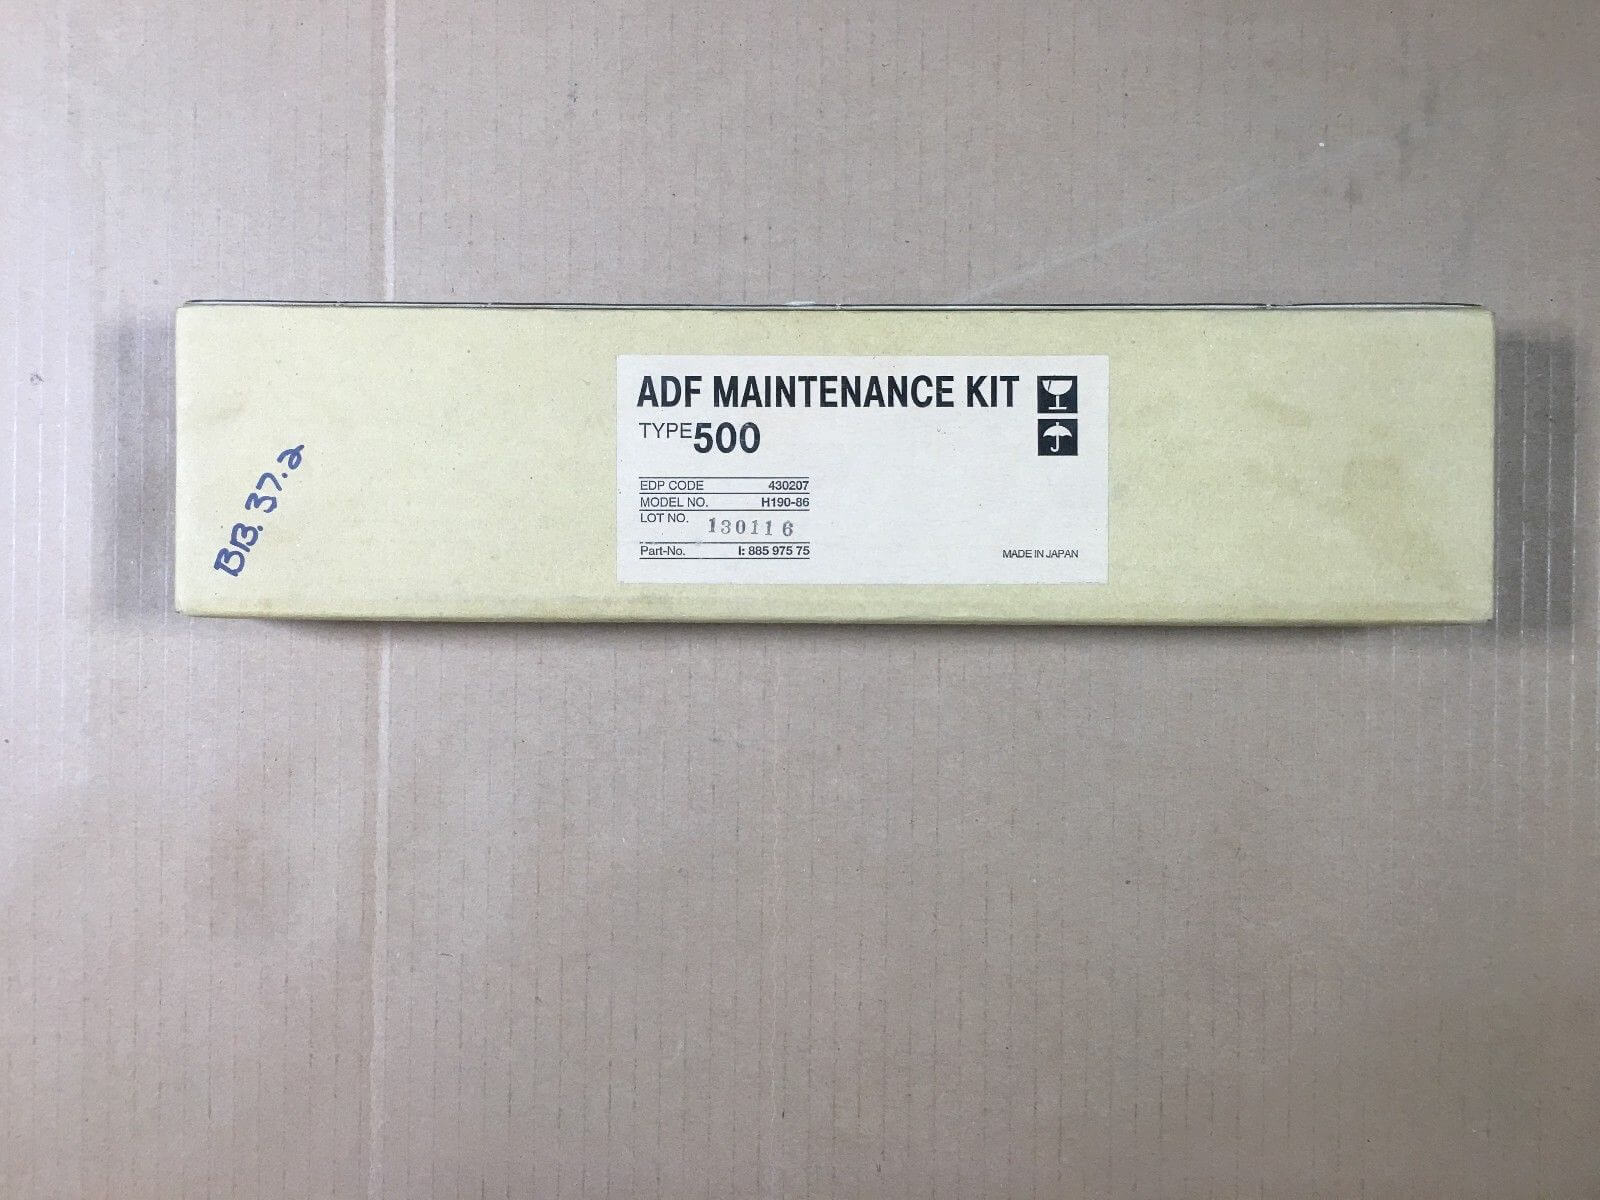 Ricoh ADF Maintenance Kit Type 500 H190-86 Same Day Shipping - copier-clearance-center